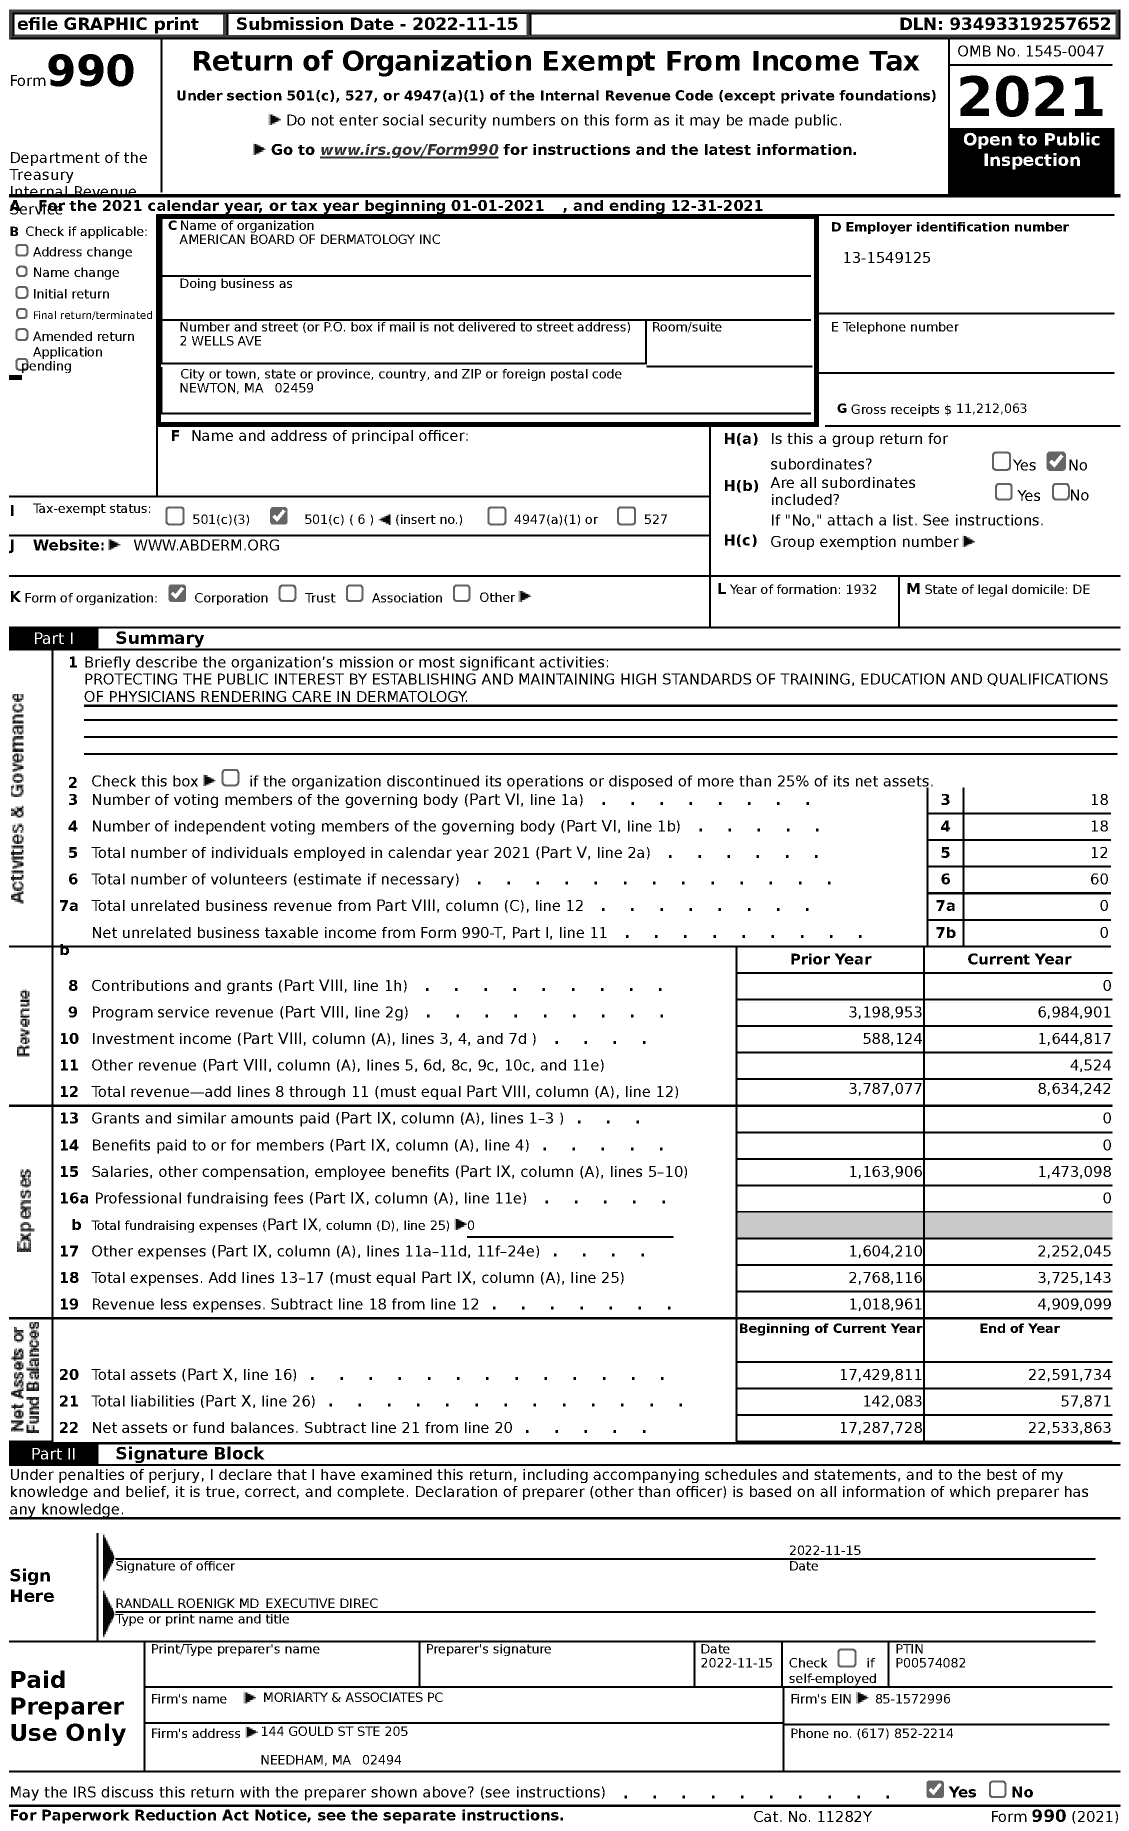 Image of first page of 2021 Form 990 for American Board of Dermatology